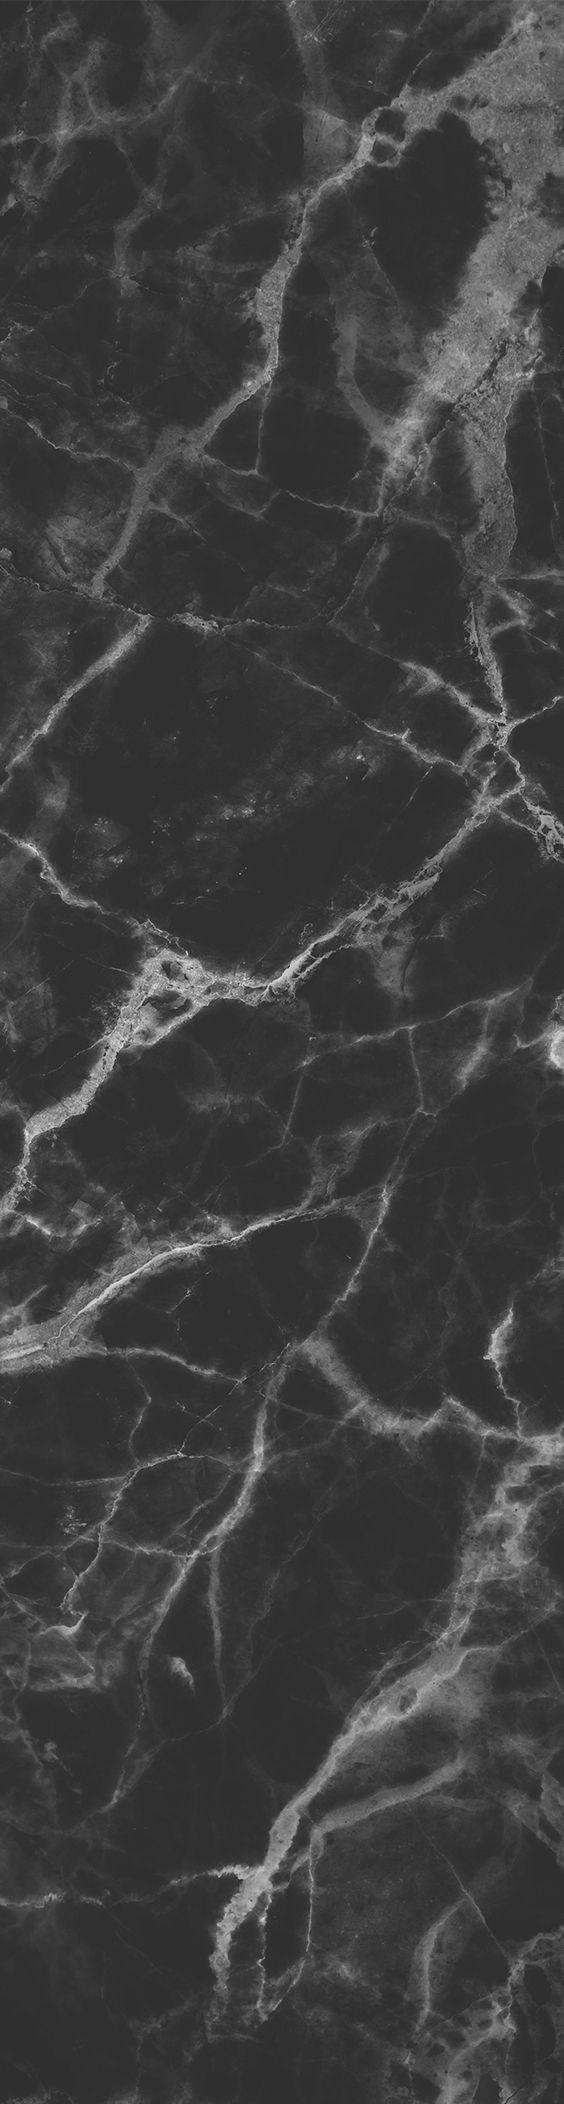 Black marble background ideas. Marble